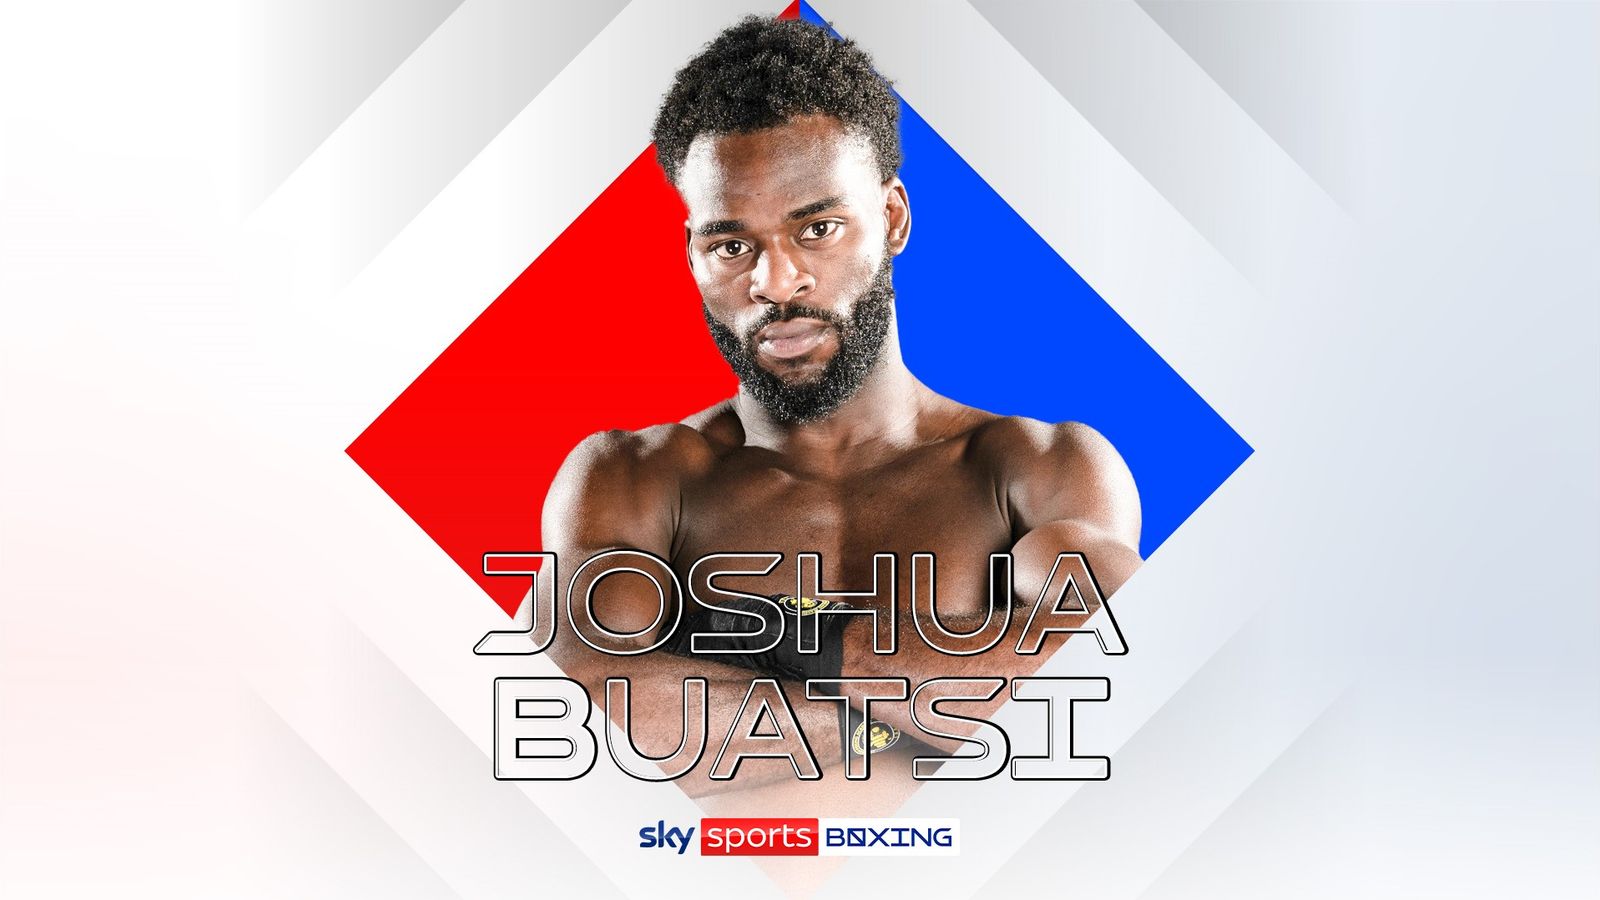 Joshua Buatsi unveiled as BOXXERs new signing and will reveal new plans in press conference